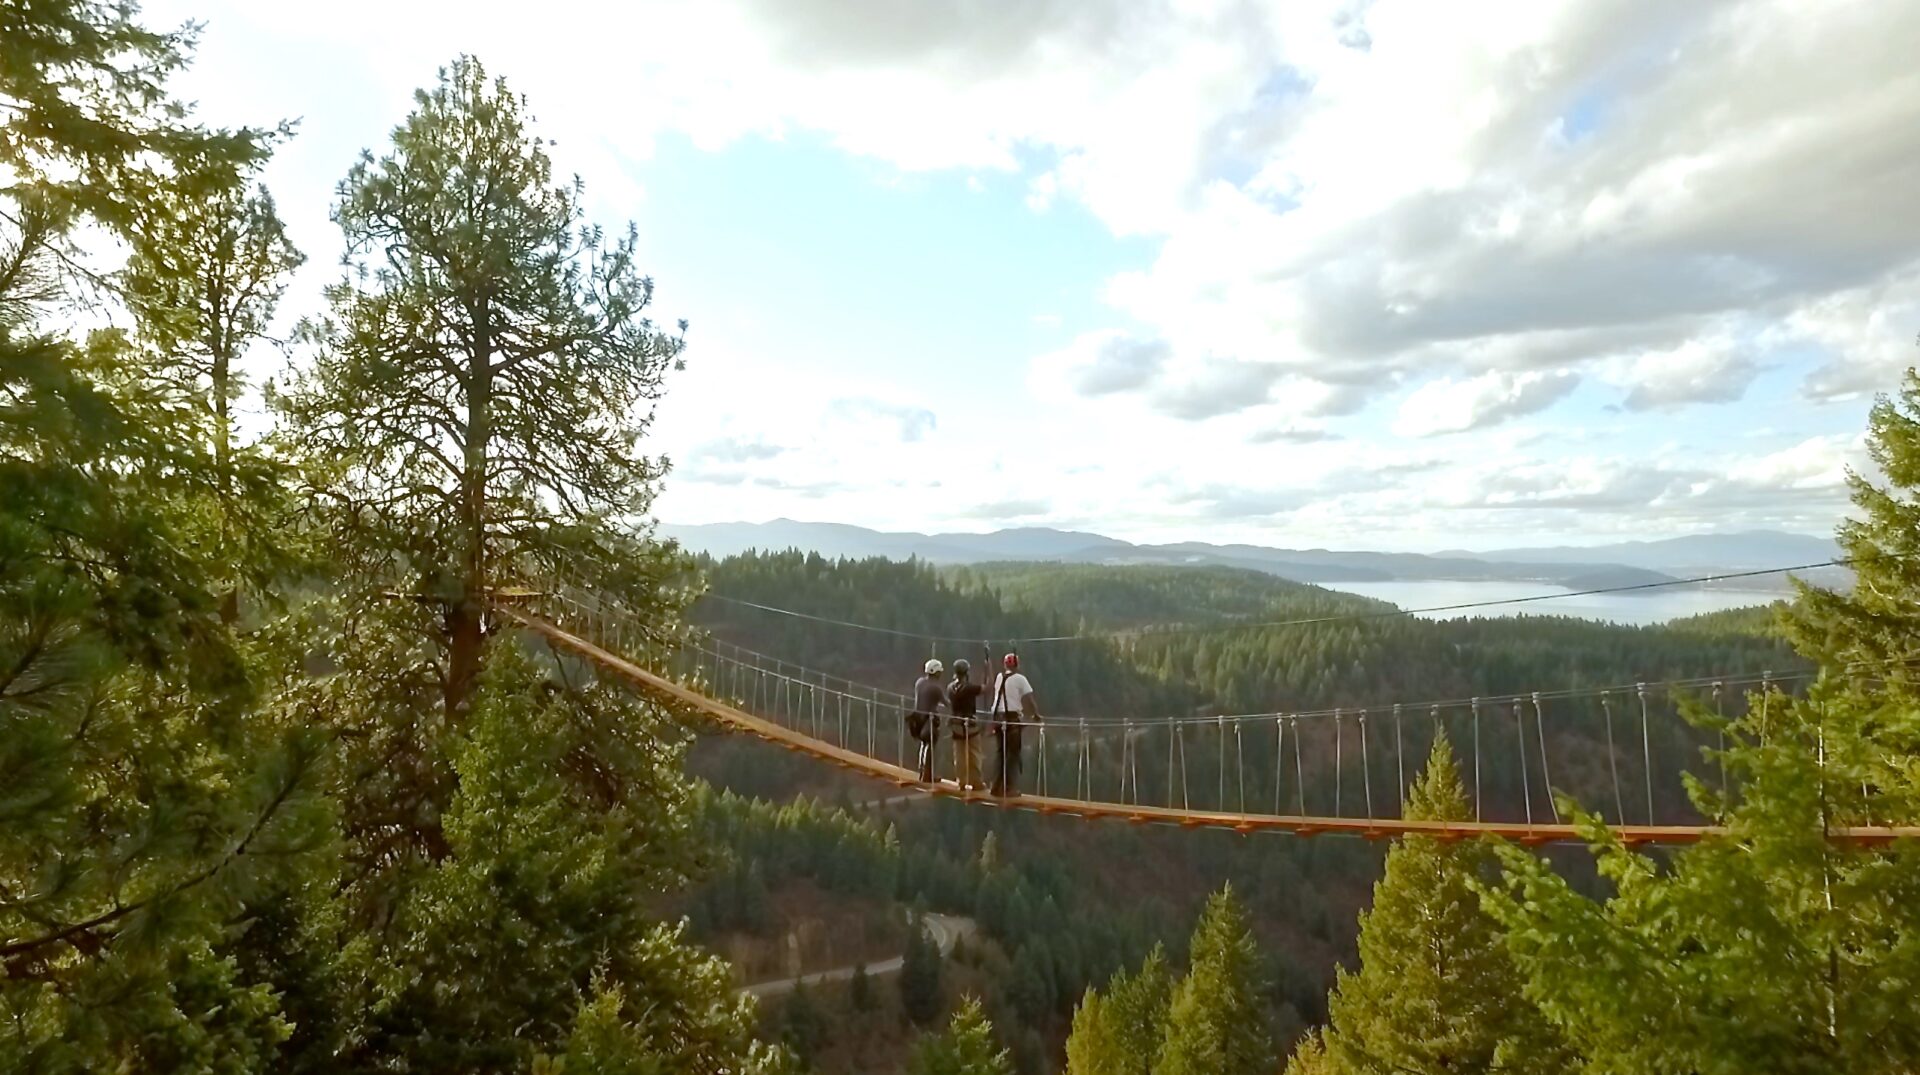 Two people standing on a high suspension bridge overlooking forested hillside with Lake Coeur d'Alene in the far distance.